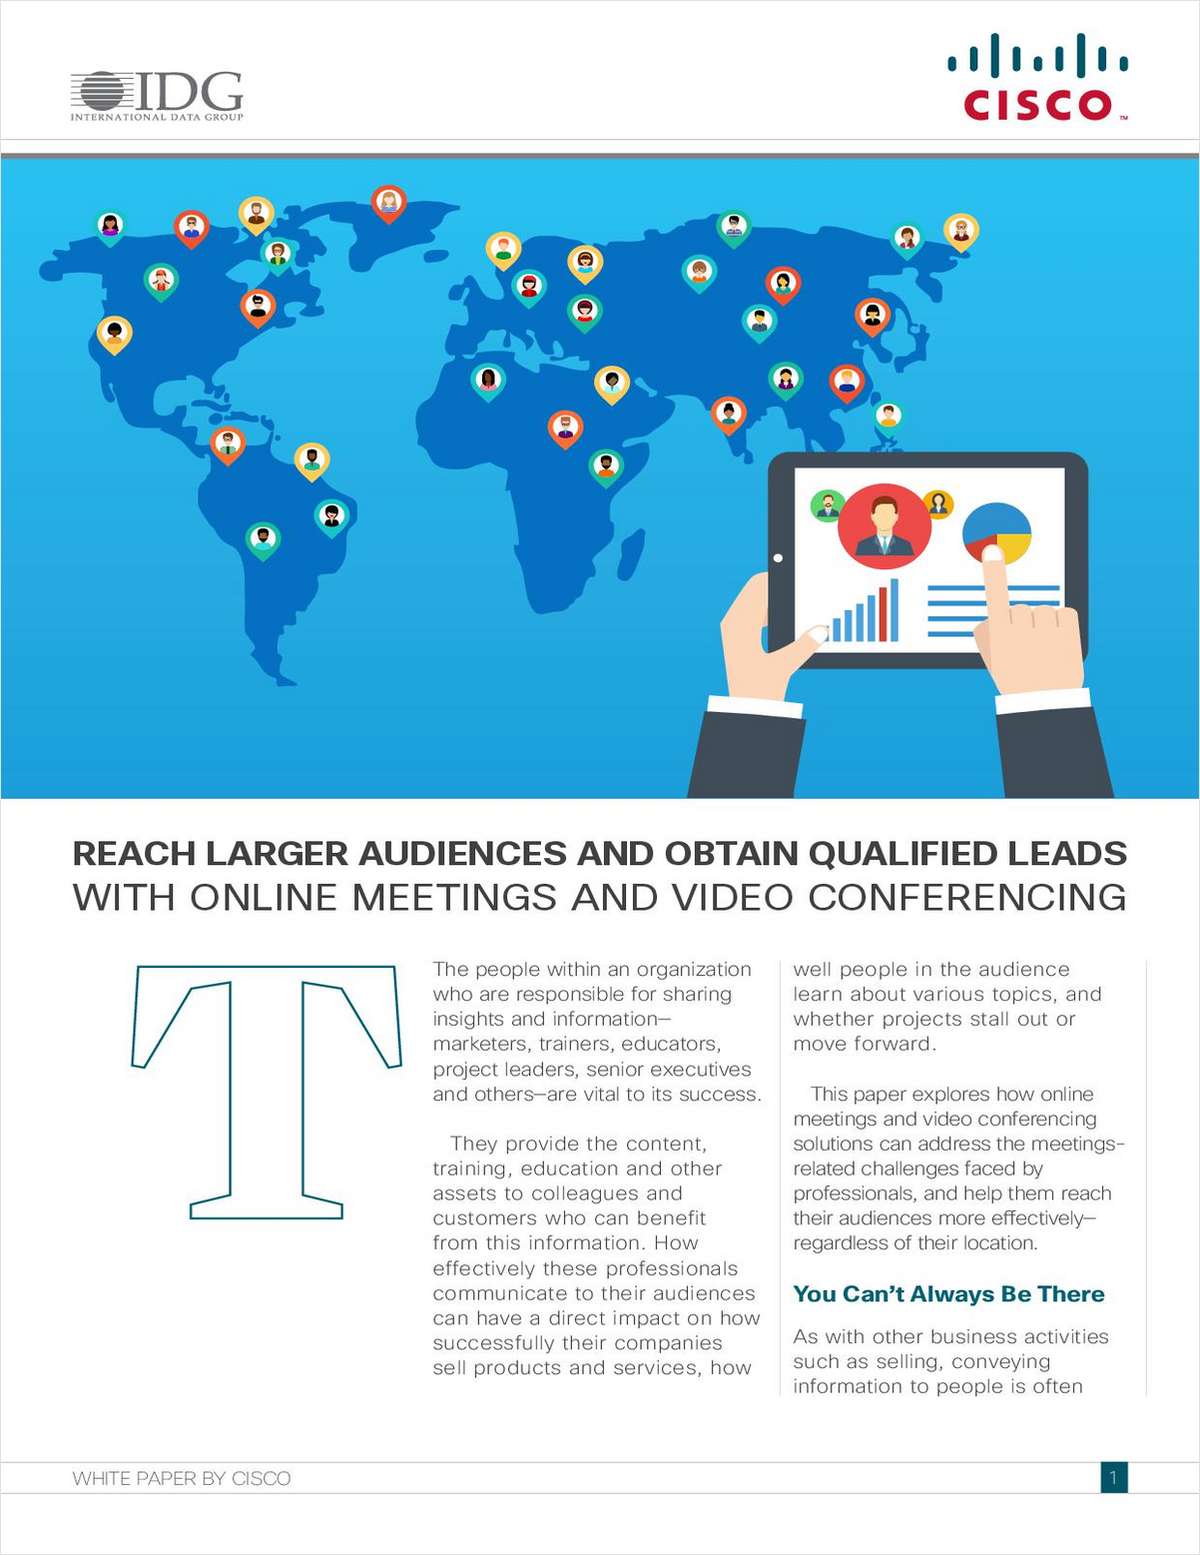 Reach Larger Audiences and Obtain Qualified Leads with Online Meetings and Video Conferencing